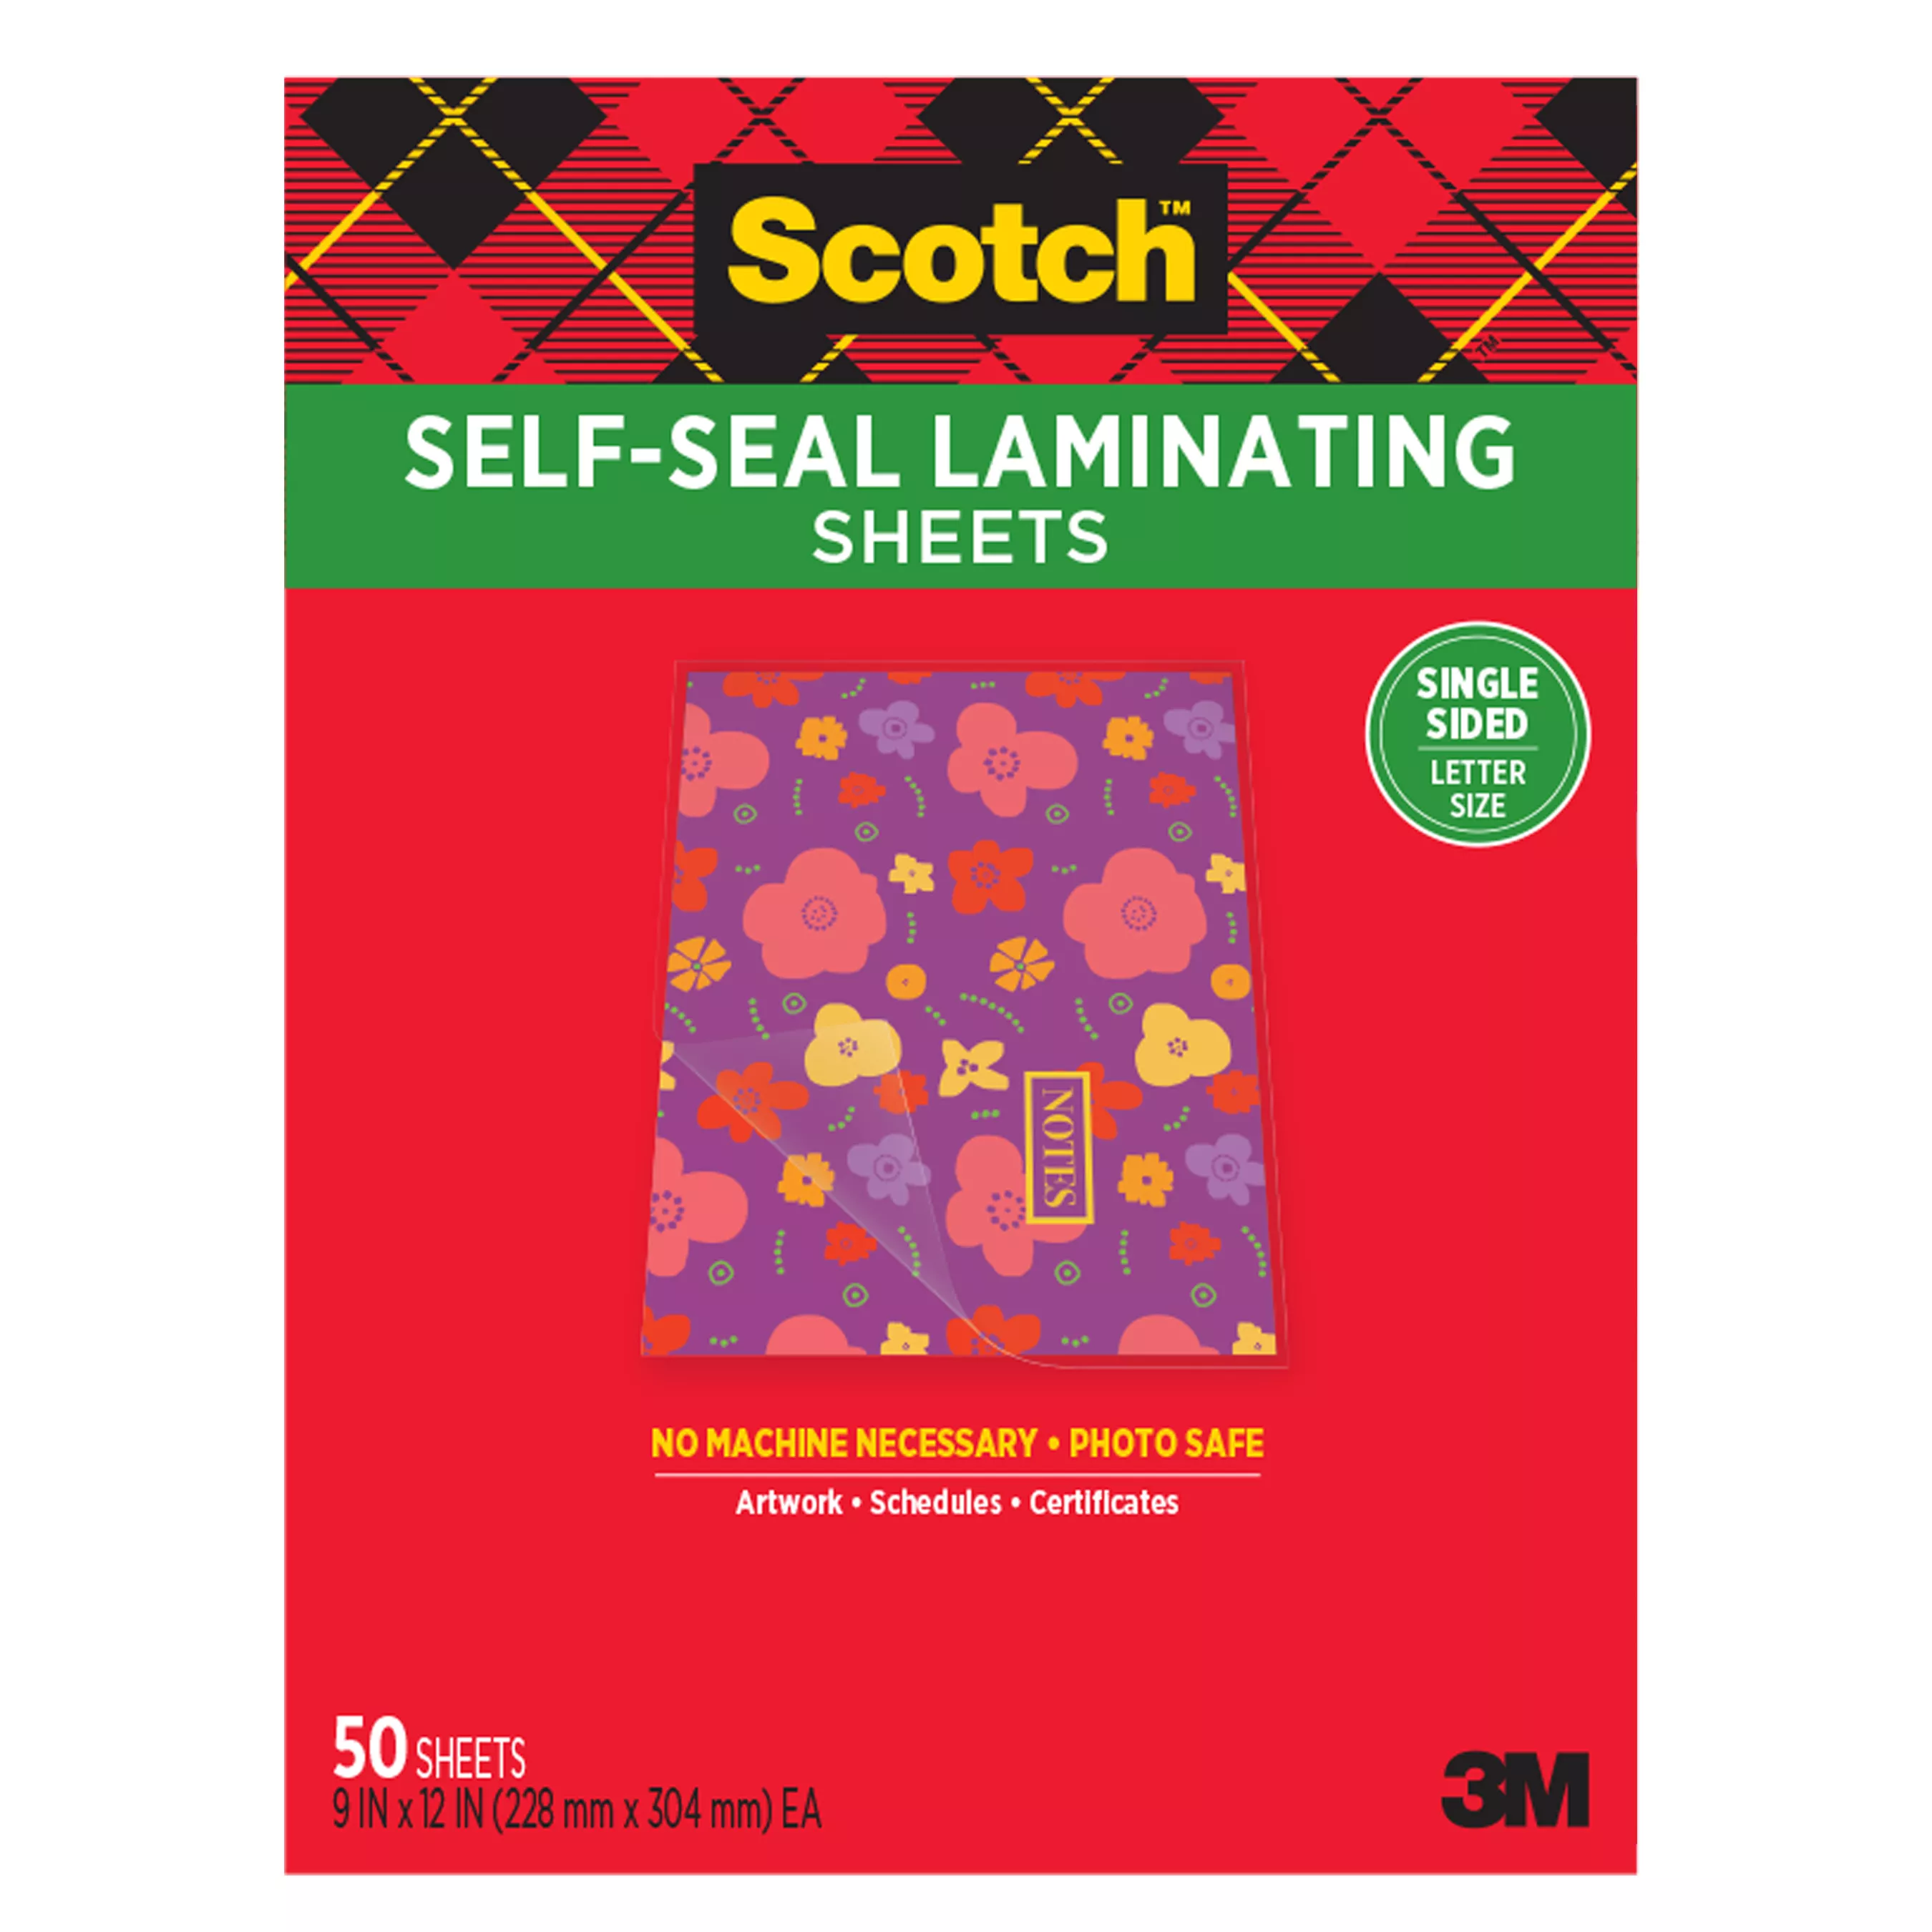 Scotch® Laminating Sheets LS854SS-50, 9 in x 12 in (228 mm x 304 mm) Letter Size Single Sided